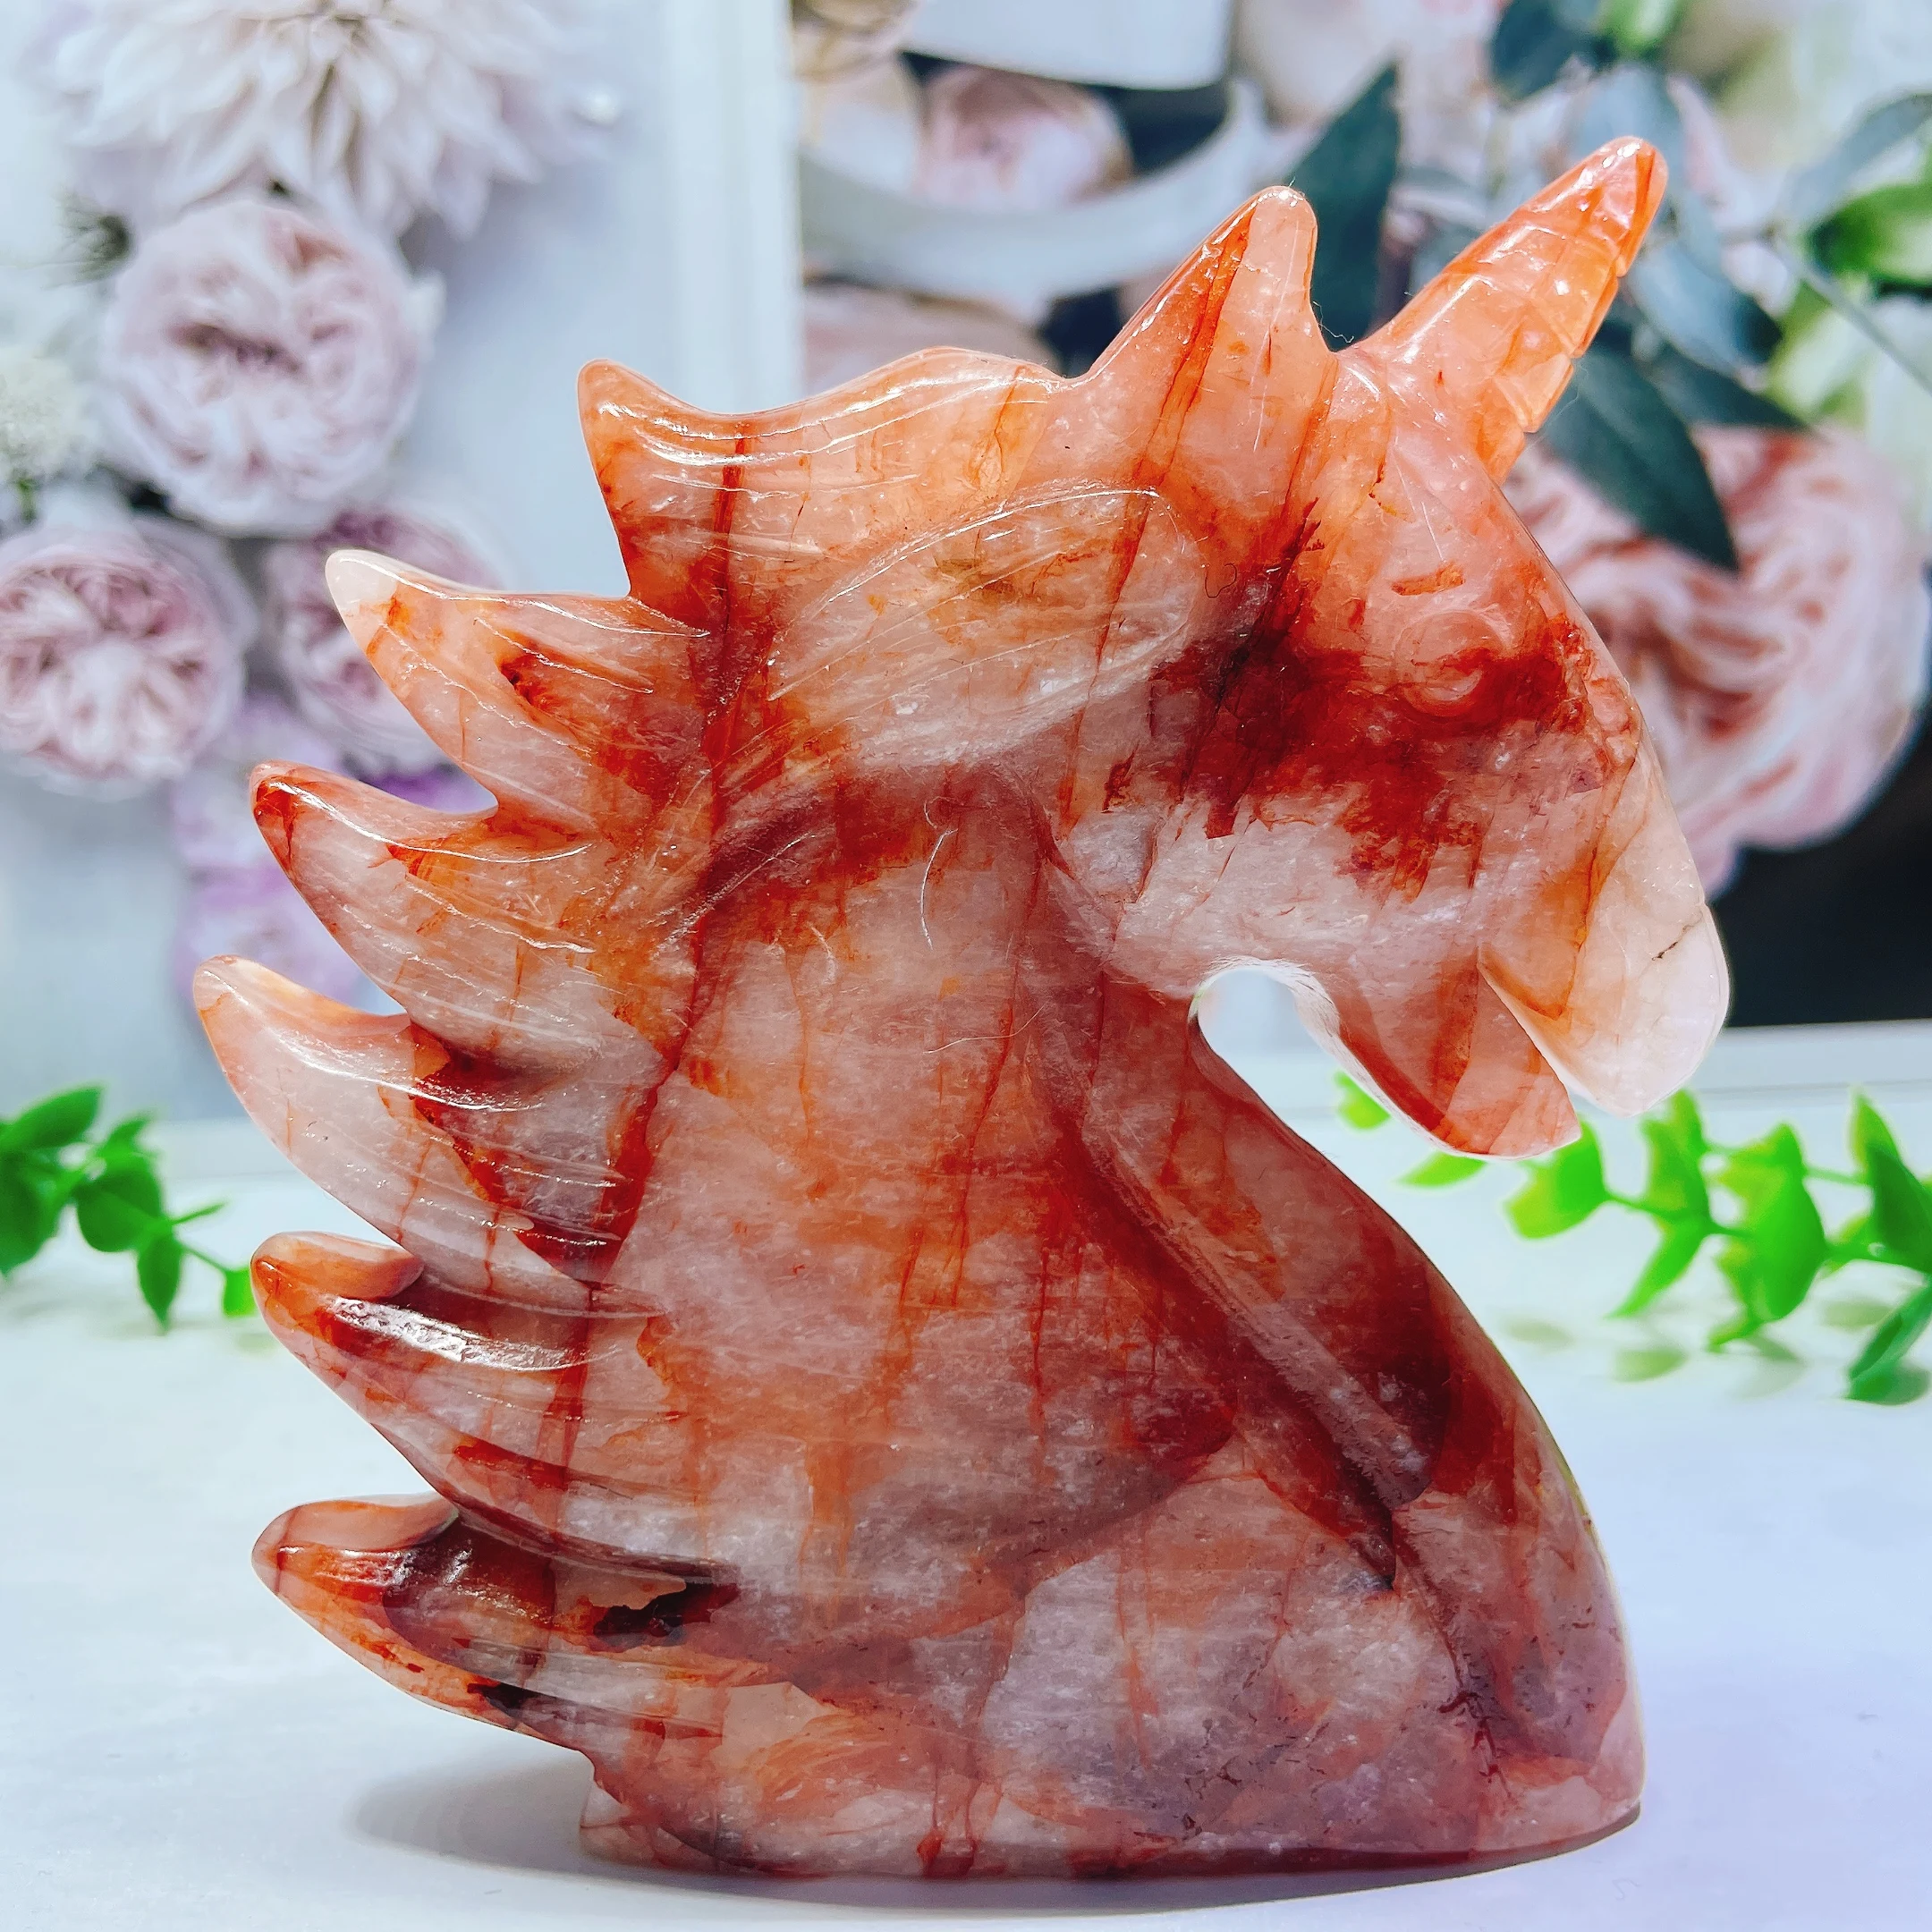 120mm Natural Red Gum Flower Unicorn Crystal Carving Statue As Gifts Or Used For Decoration Of Domestic Rooms 1pcs